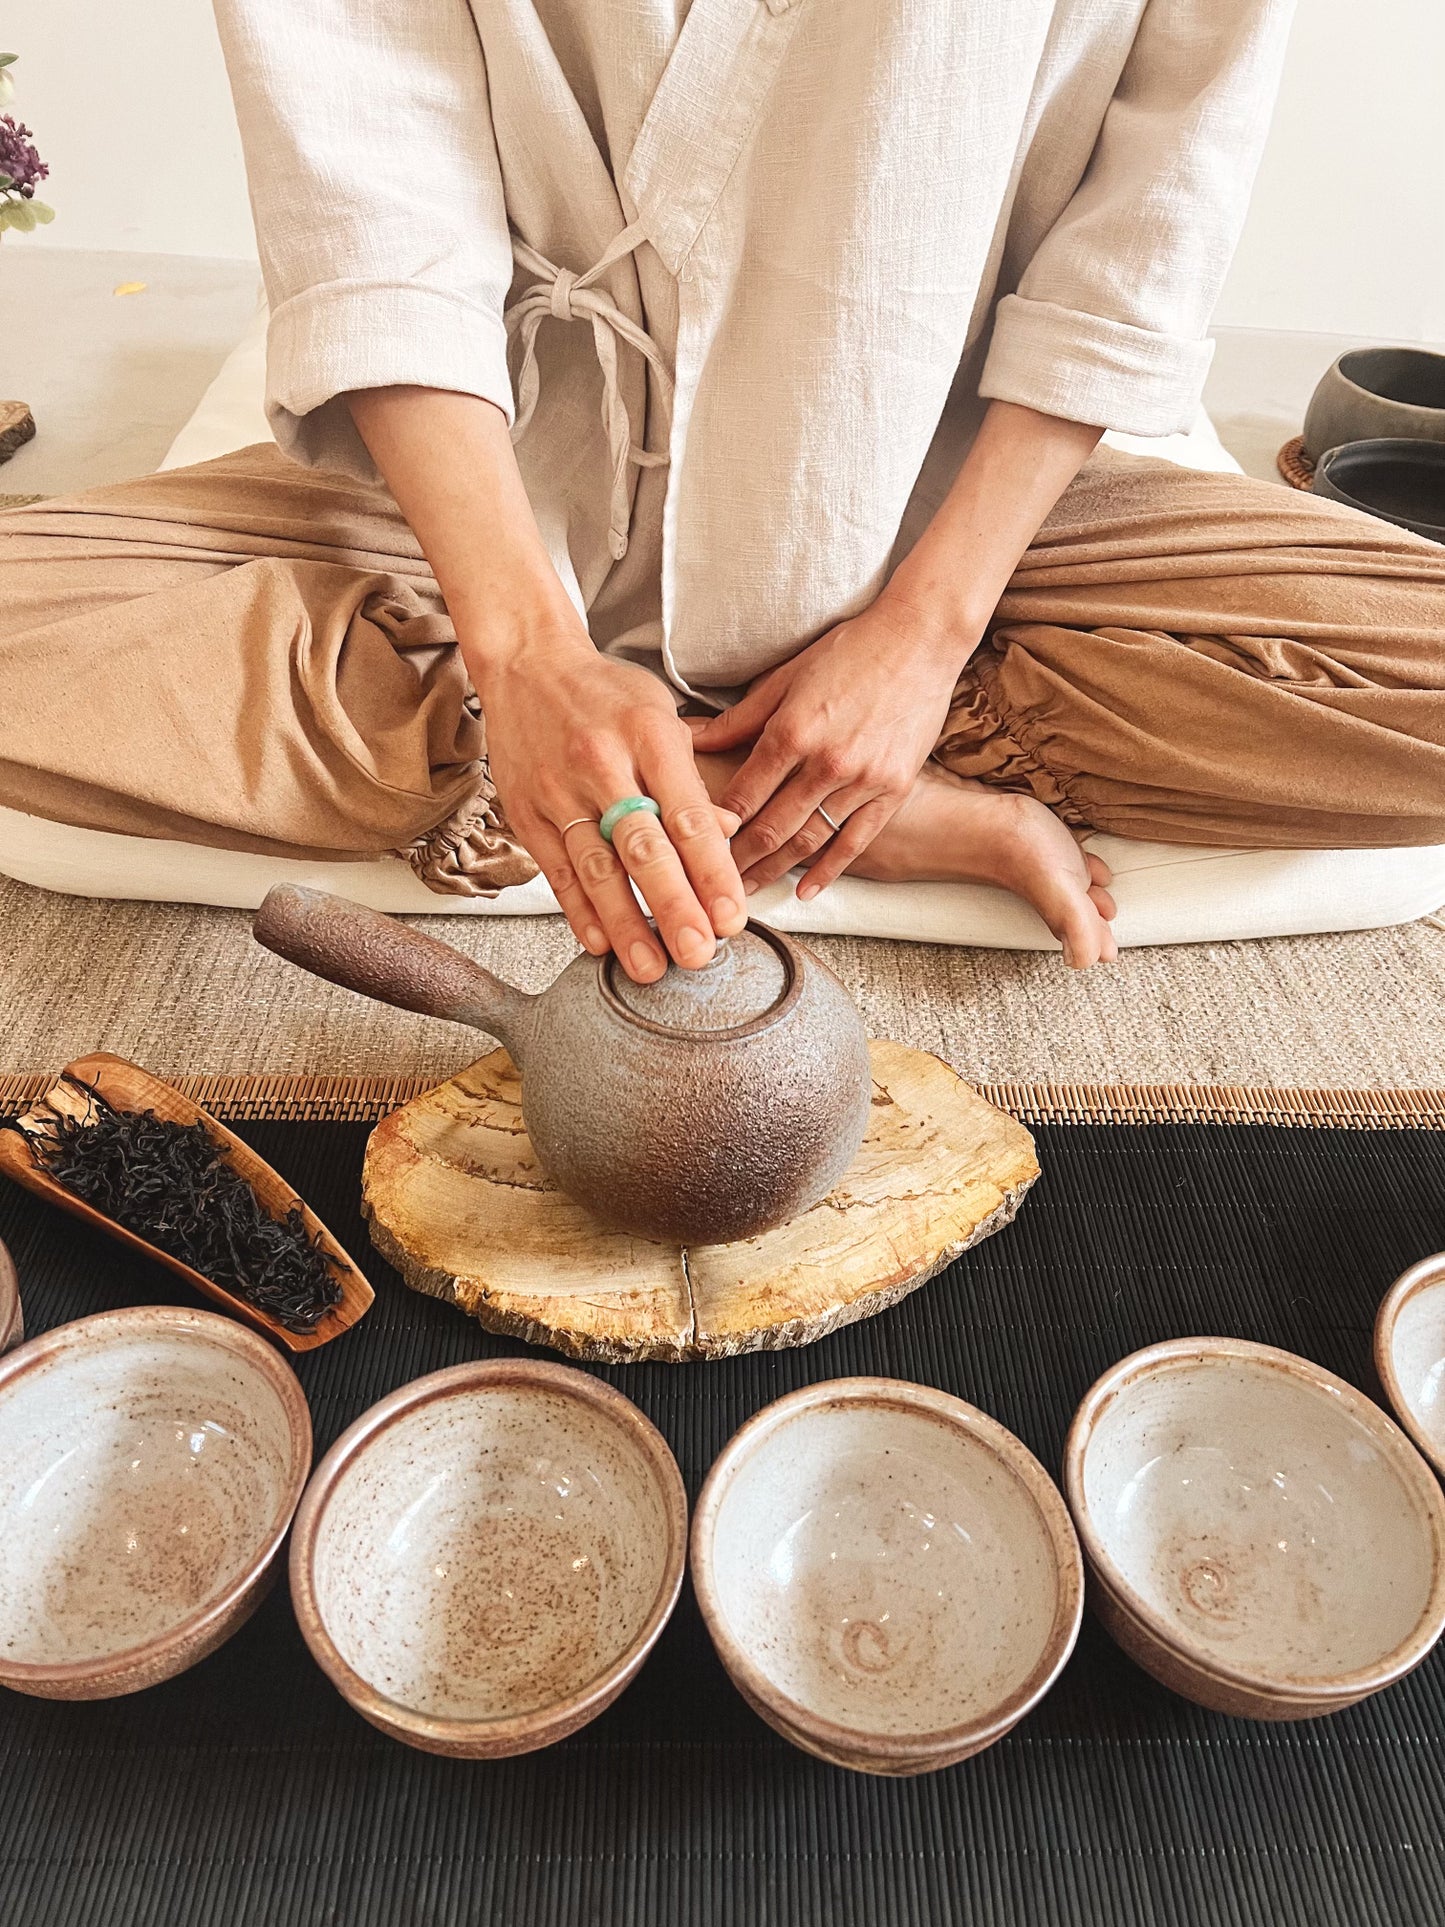 Tea Circle & Sound Bath with Grace Flowers & Lizette Romero - Saturday May 25th - 10am